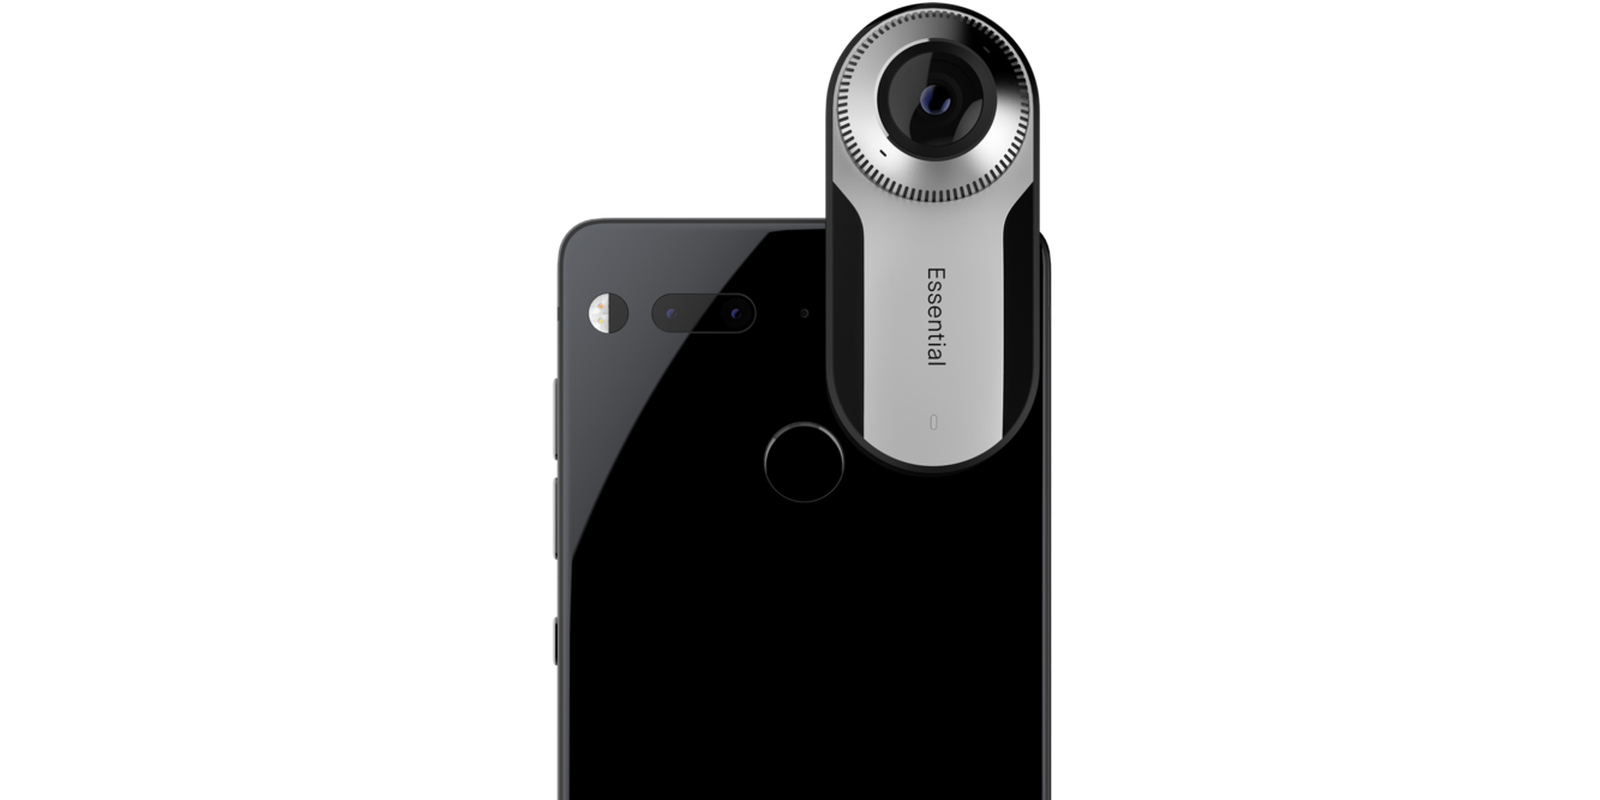 Cyber Monday deal: Get the Essential Phone + its 360 camera addon for just $399